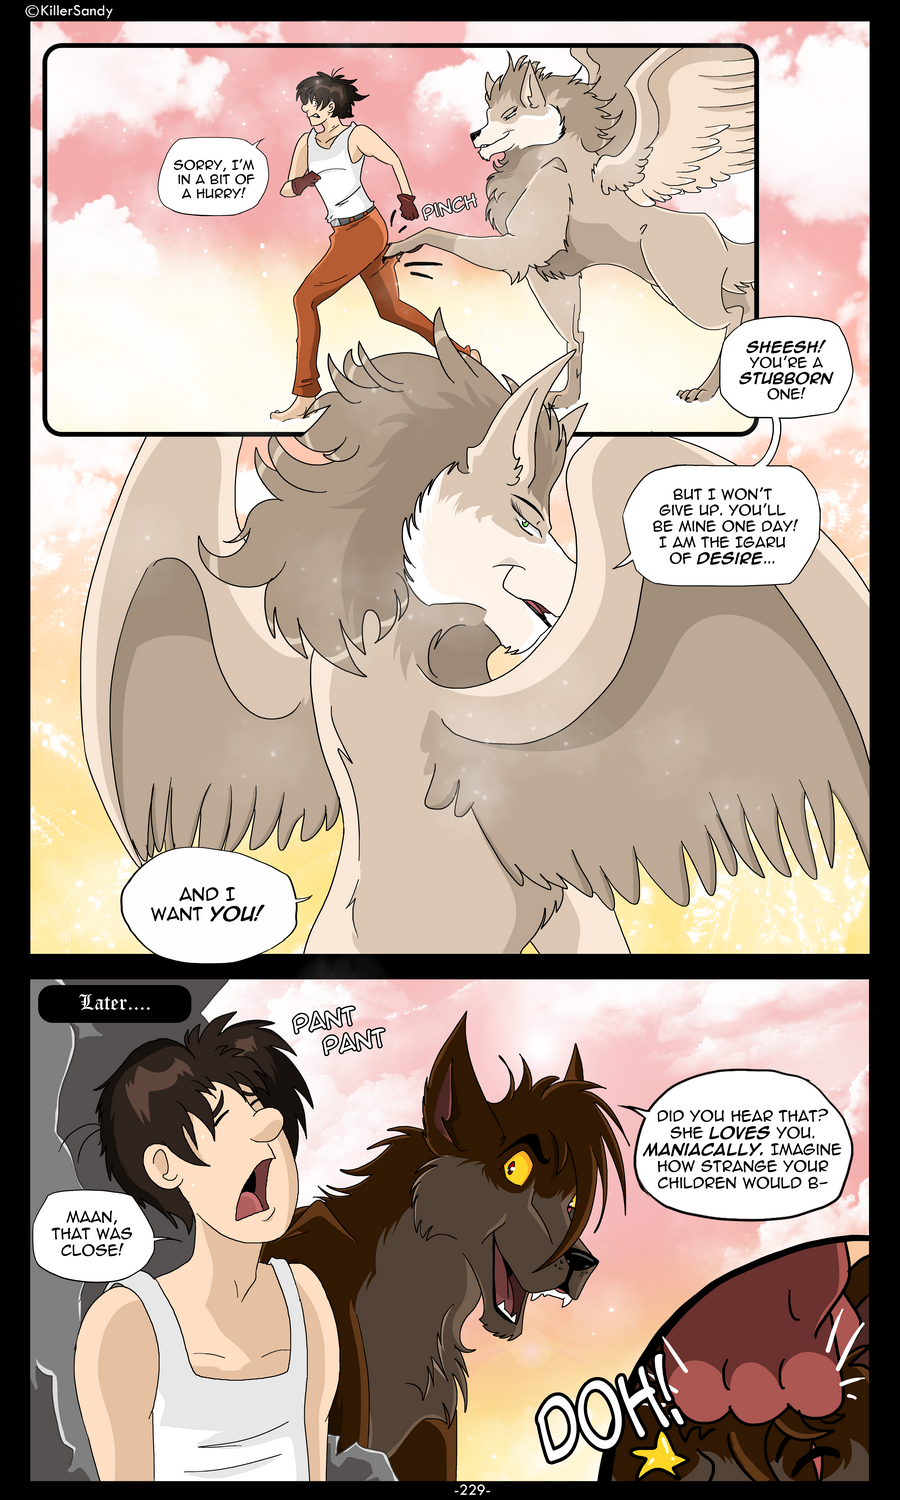 The Prince of the Moonlight Stone page 229